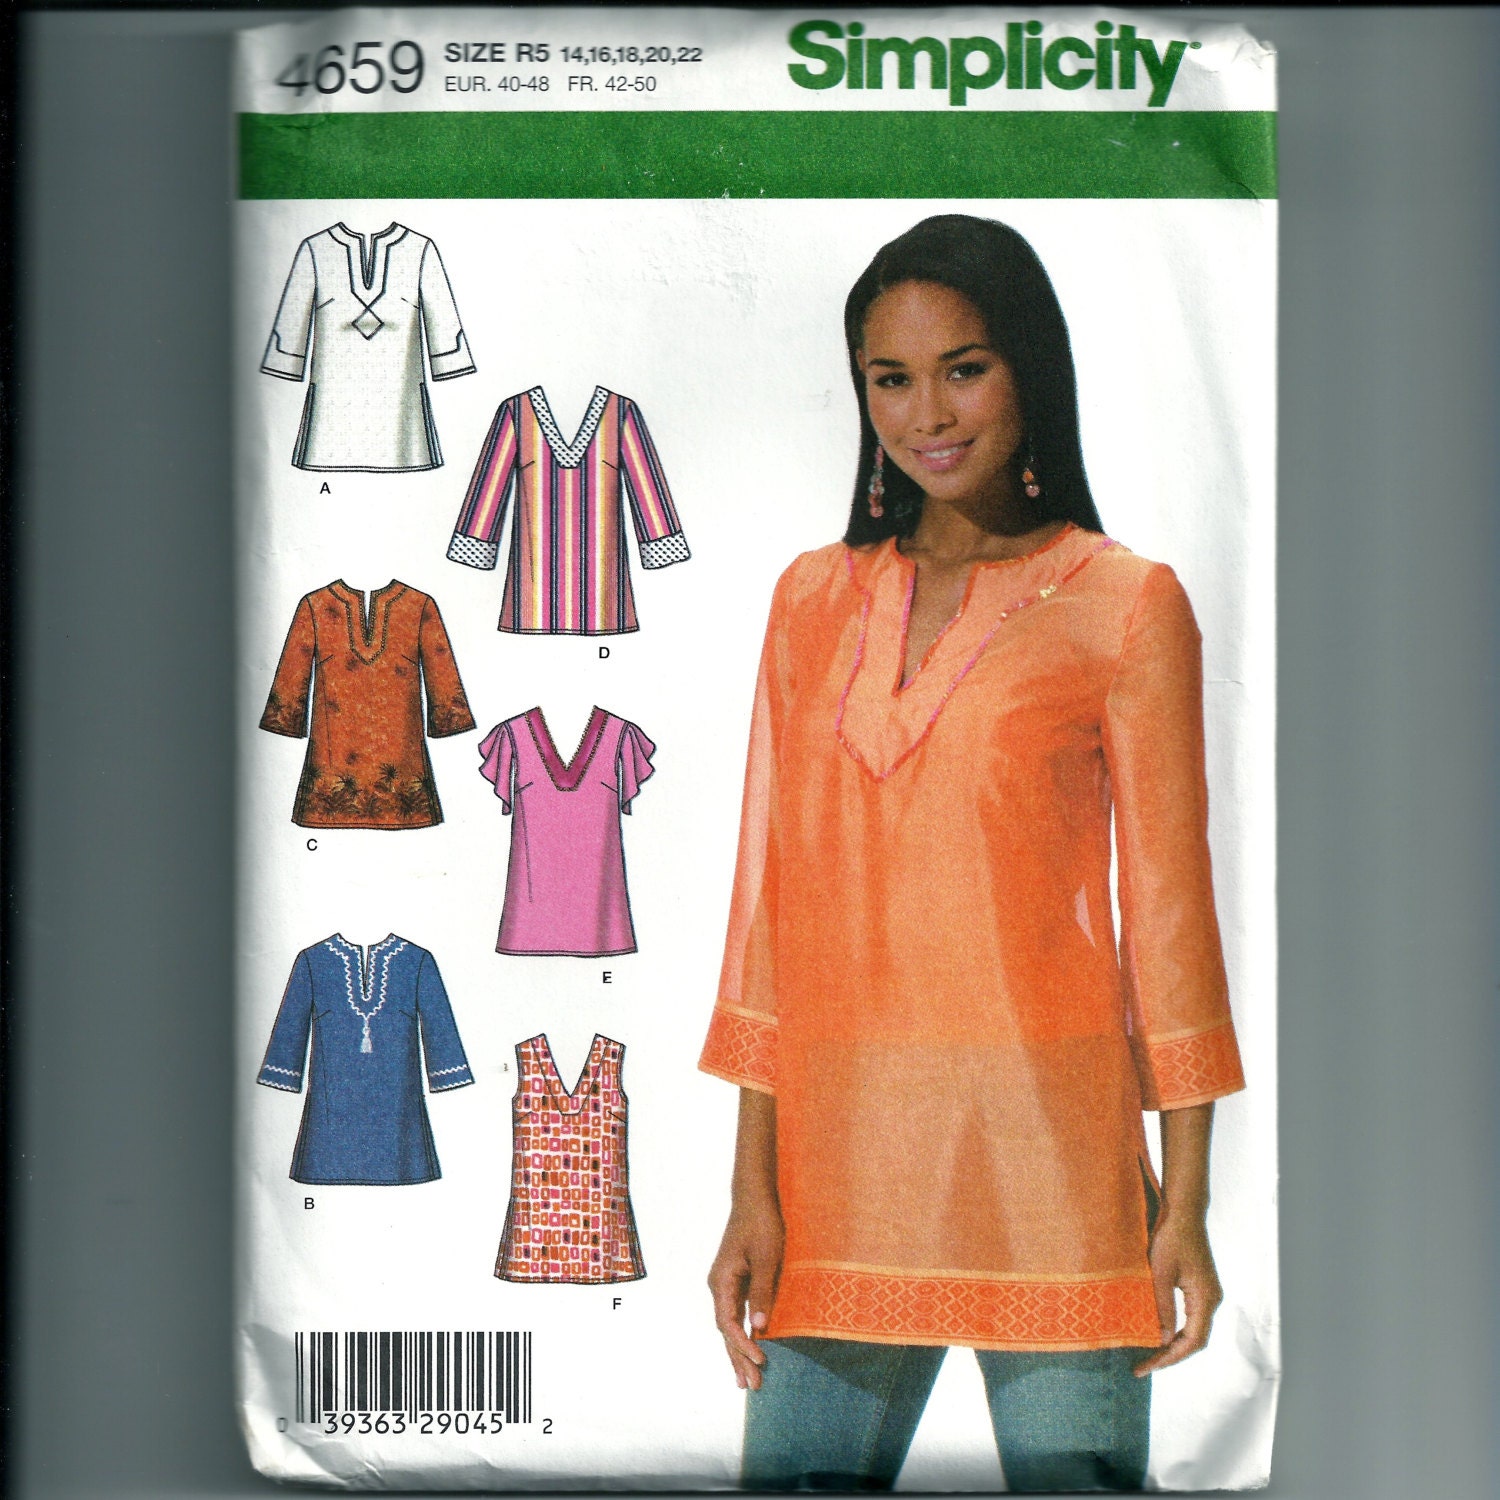 Simplicity Misses' Tunic Pattern 4659